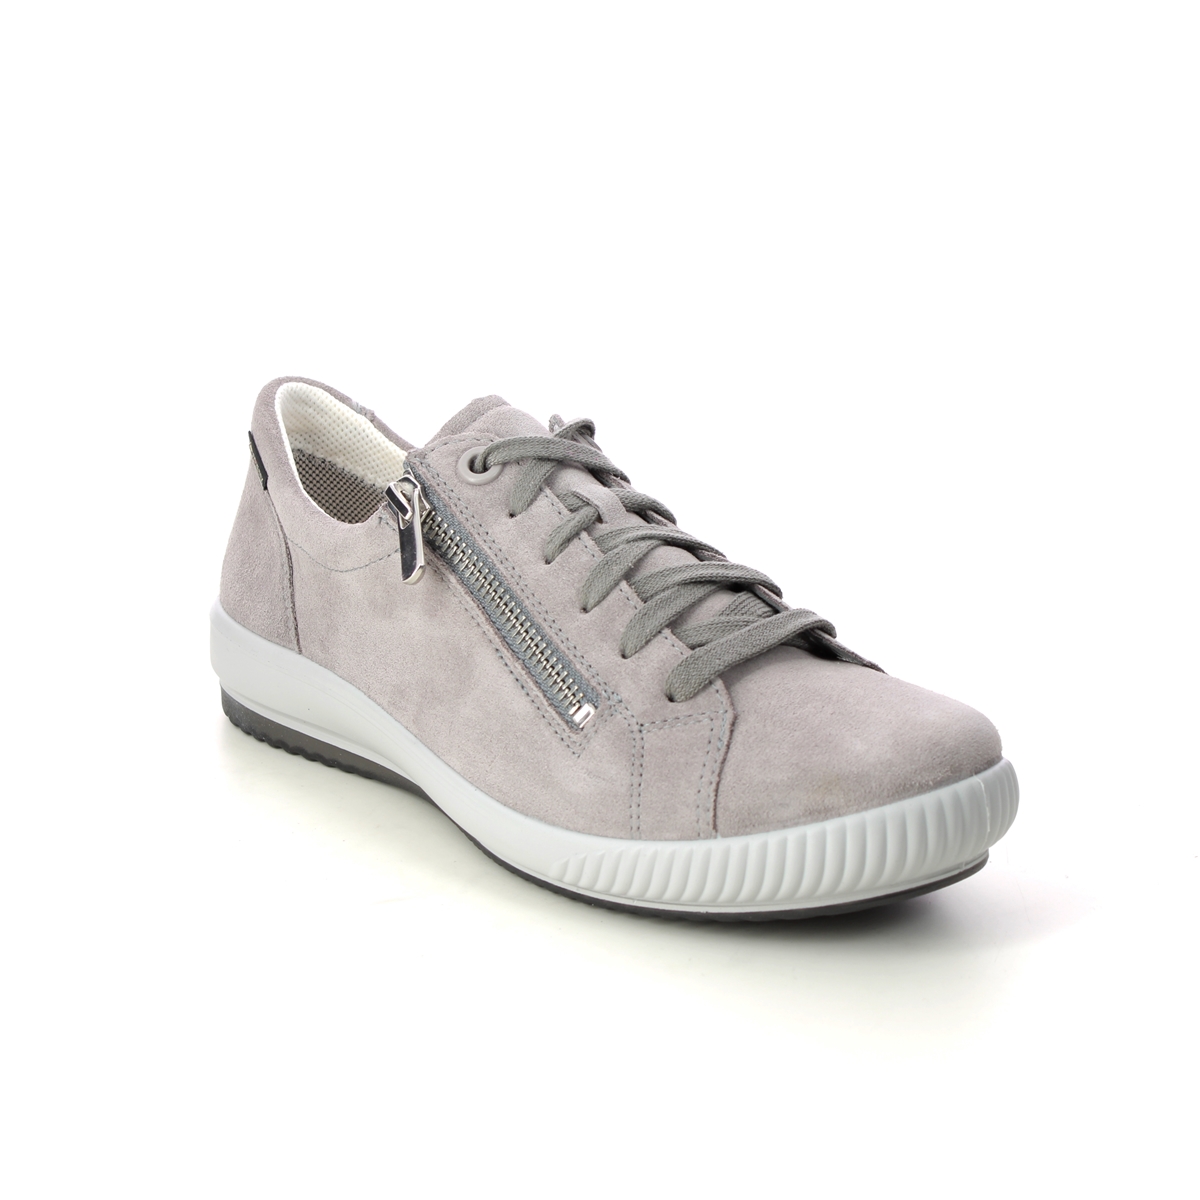 Legero Tanaro 5 Gtx Light Grey Suede Womens lacing shoes 2000219-2900 in a Plain Leather in Size 4